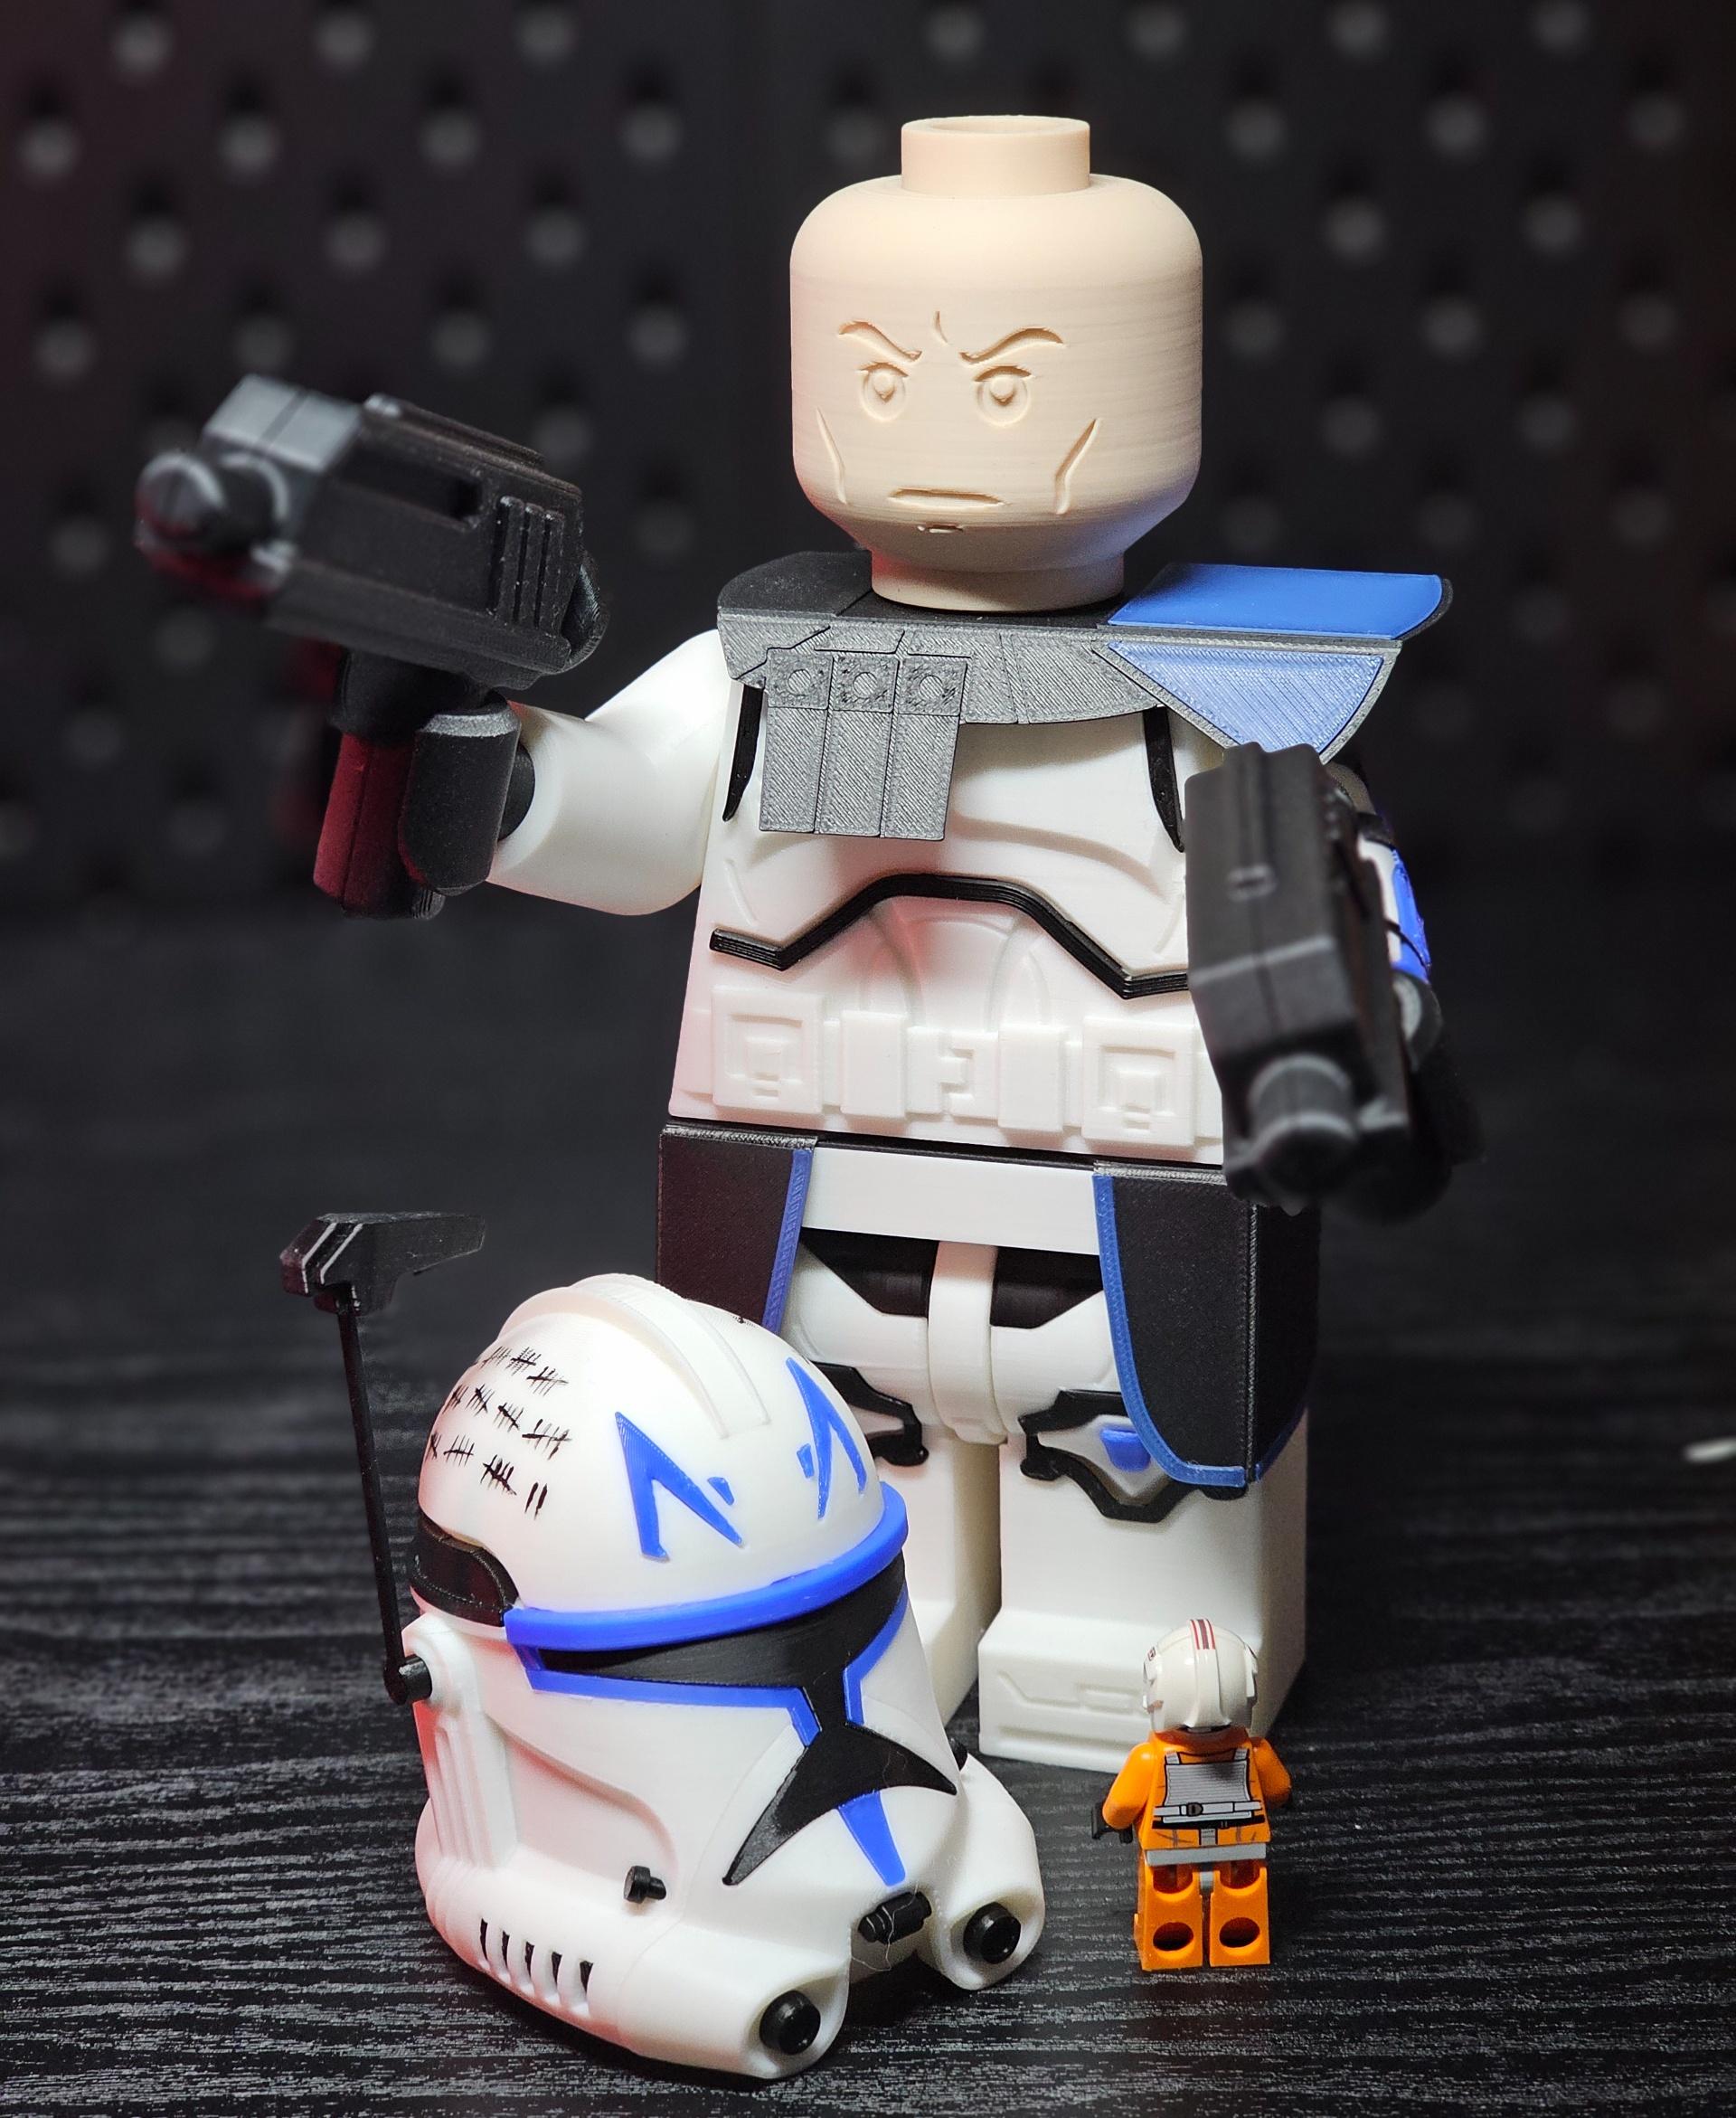 Captain Rex (6:1 LEGO - "In my book, experience outranks everything." - 3d model